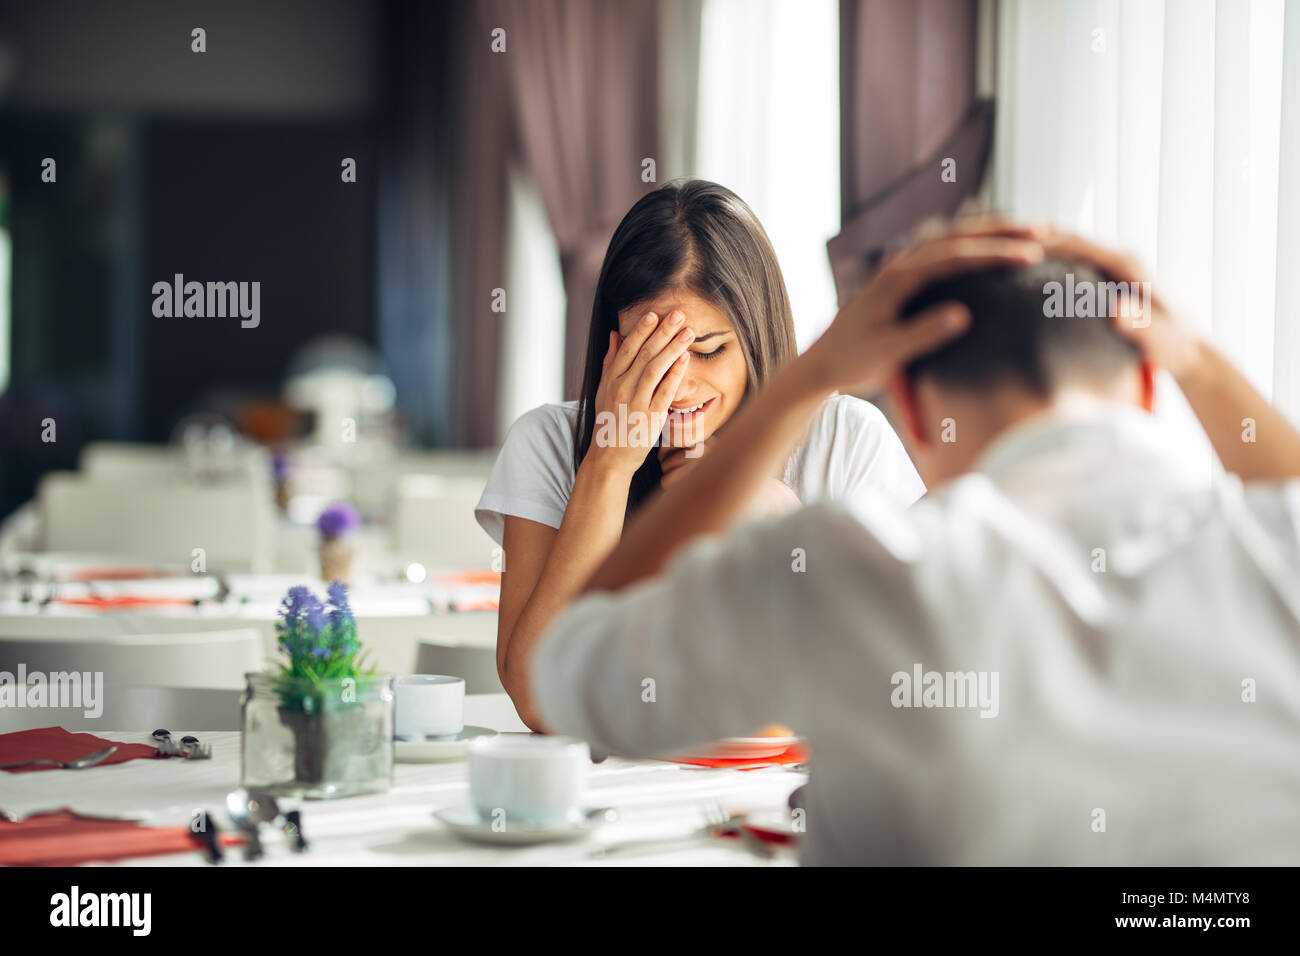 Crying stressed woman arguing with a man about problems.Reaction to negative event,handling bad news.Breaking up long relationship.Emotional troubled  Stock Photo